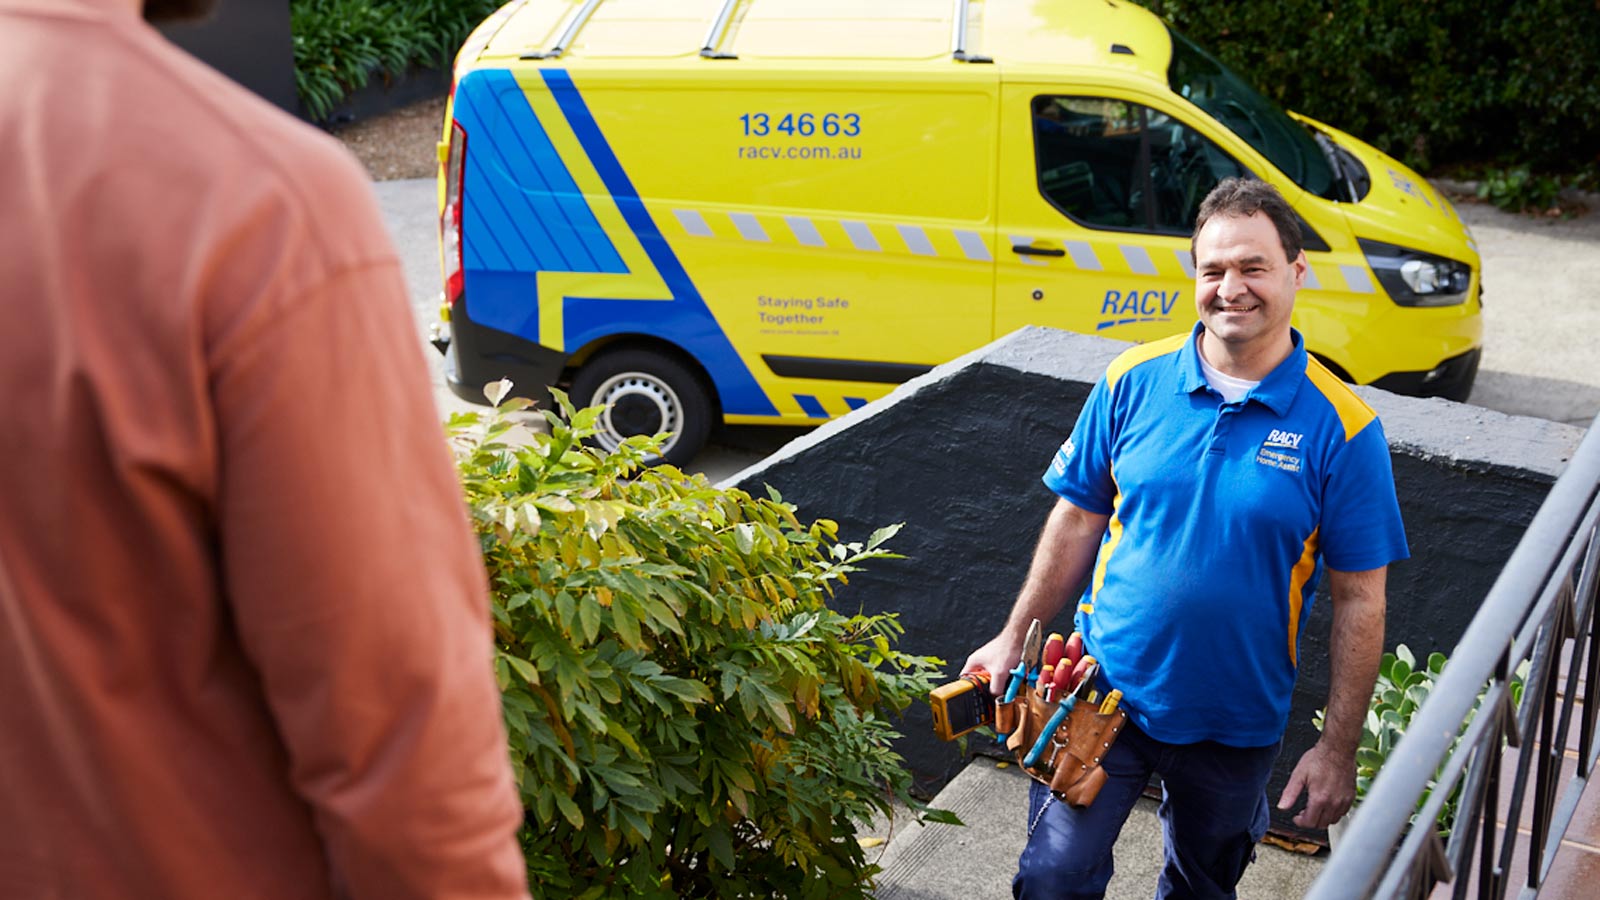 RACV Tradesman smiling and greeting homeowner on front porch with yellow and blue tradie van in background.